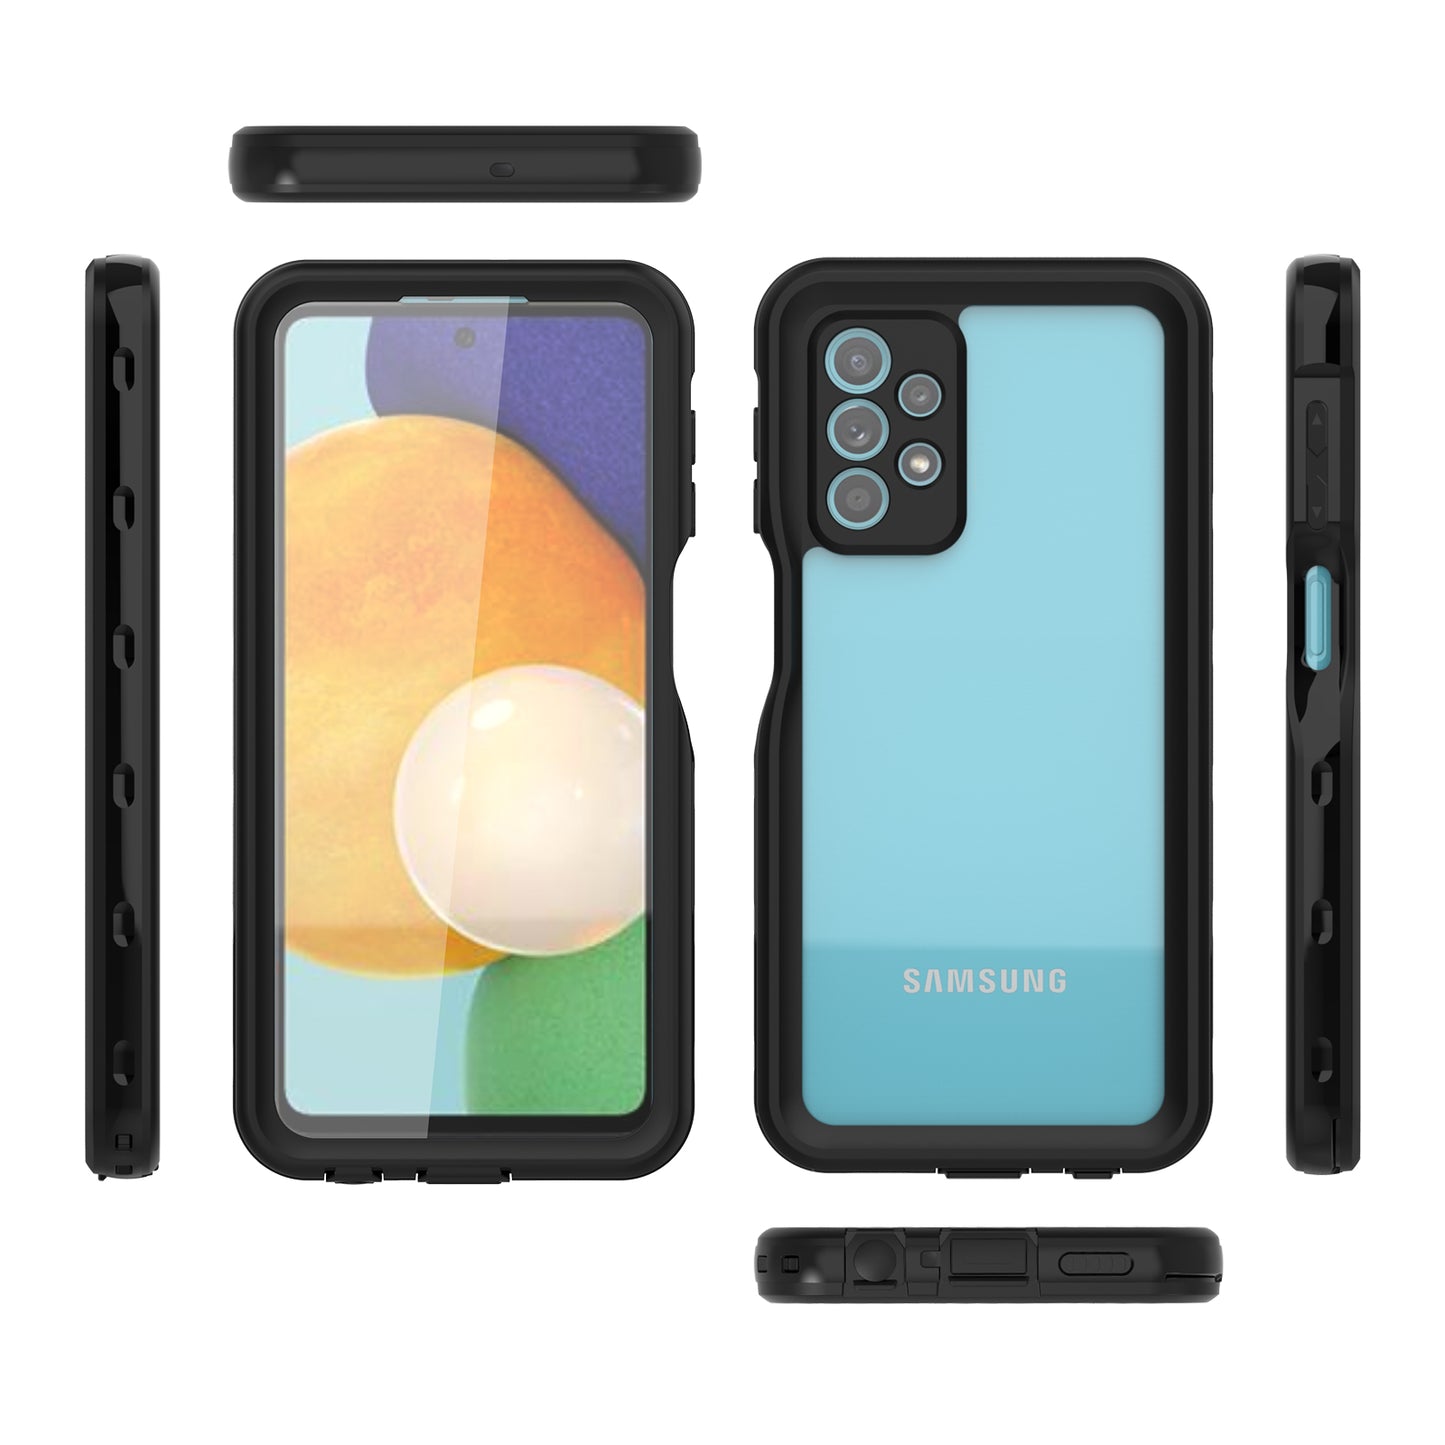 Samsung Galaxy A23 Case Waterproof IP68 Clear Full Protection Built-in Screen Protector